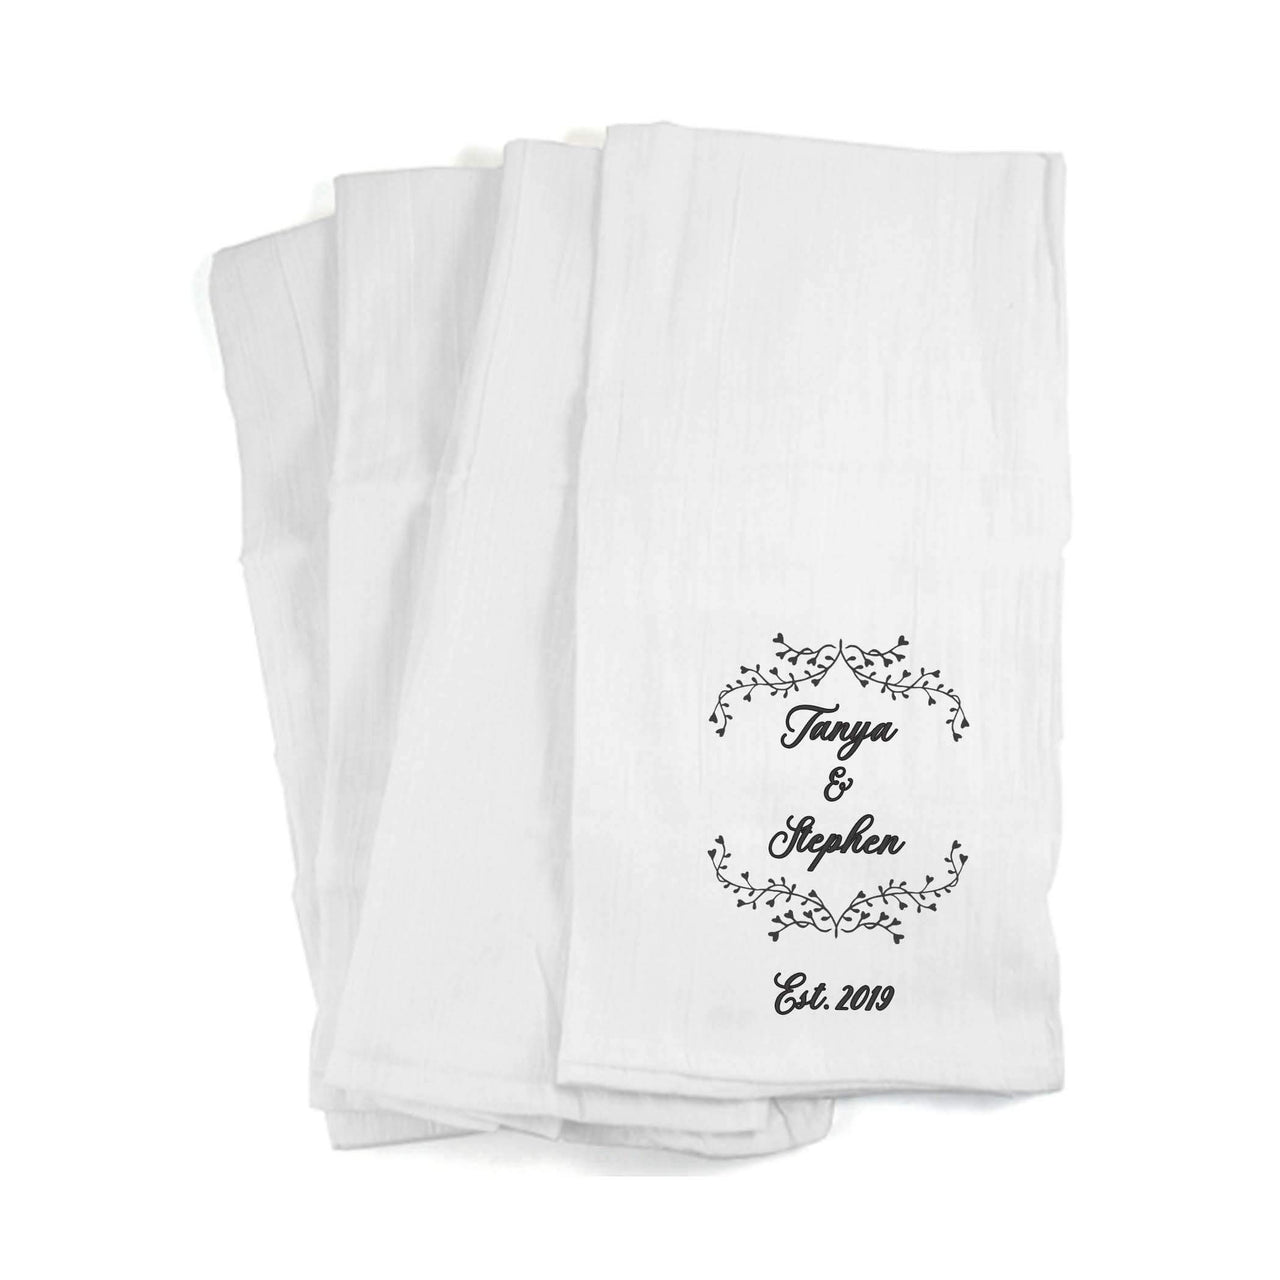 Kitchen Towels Personalized with a Couple's Name and Date